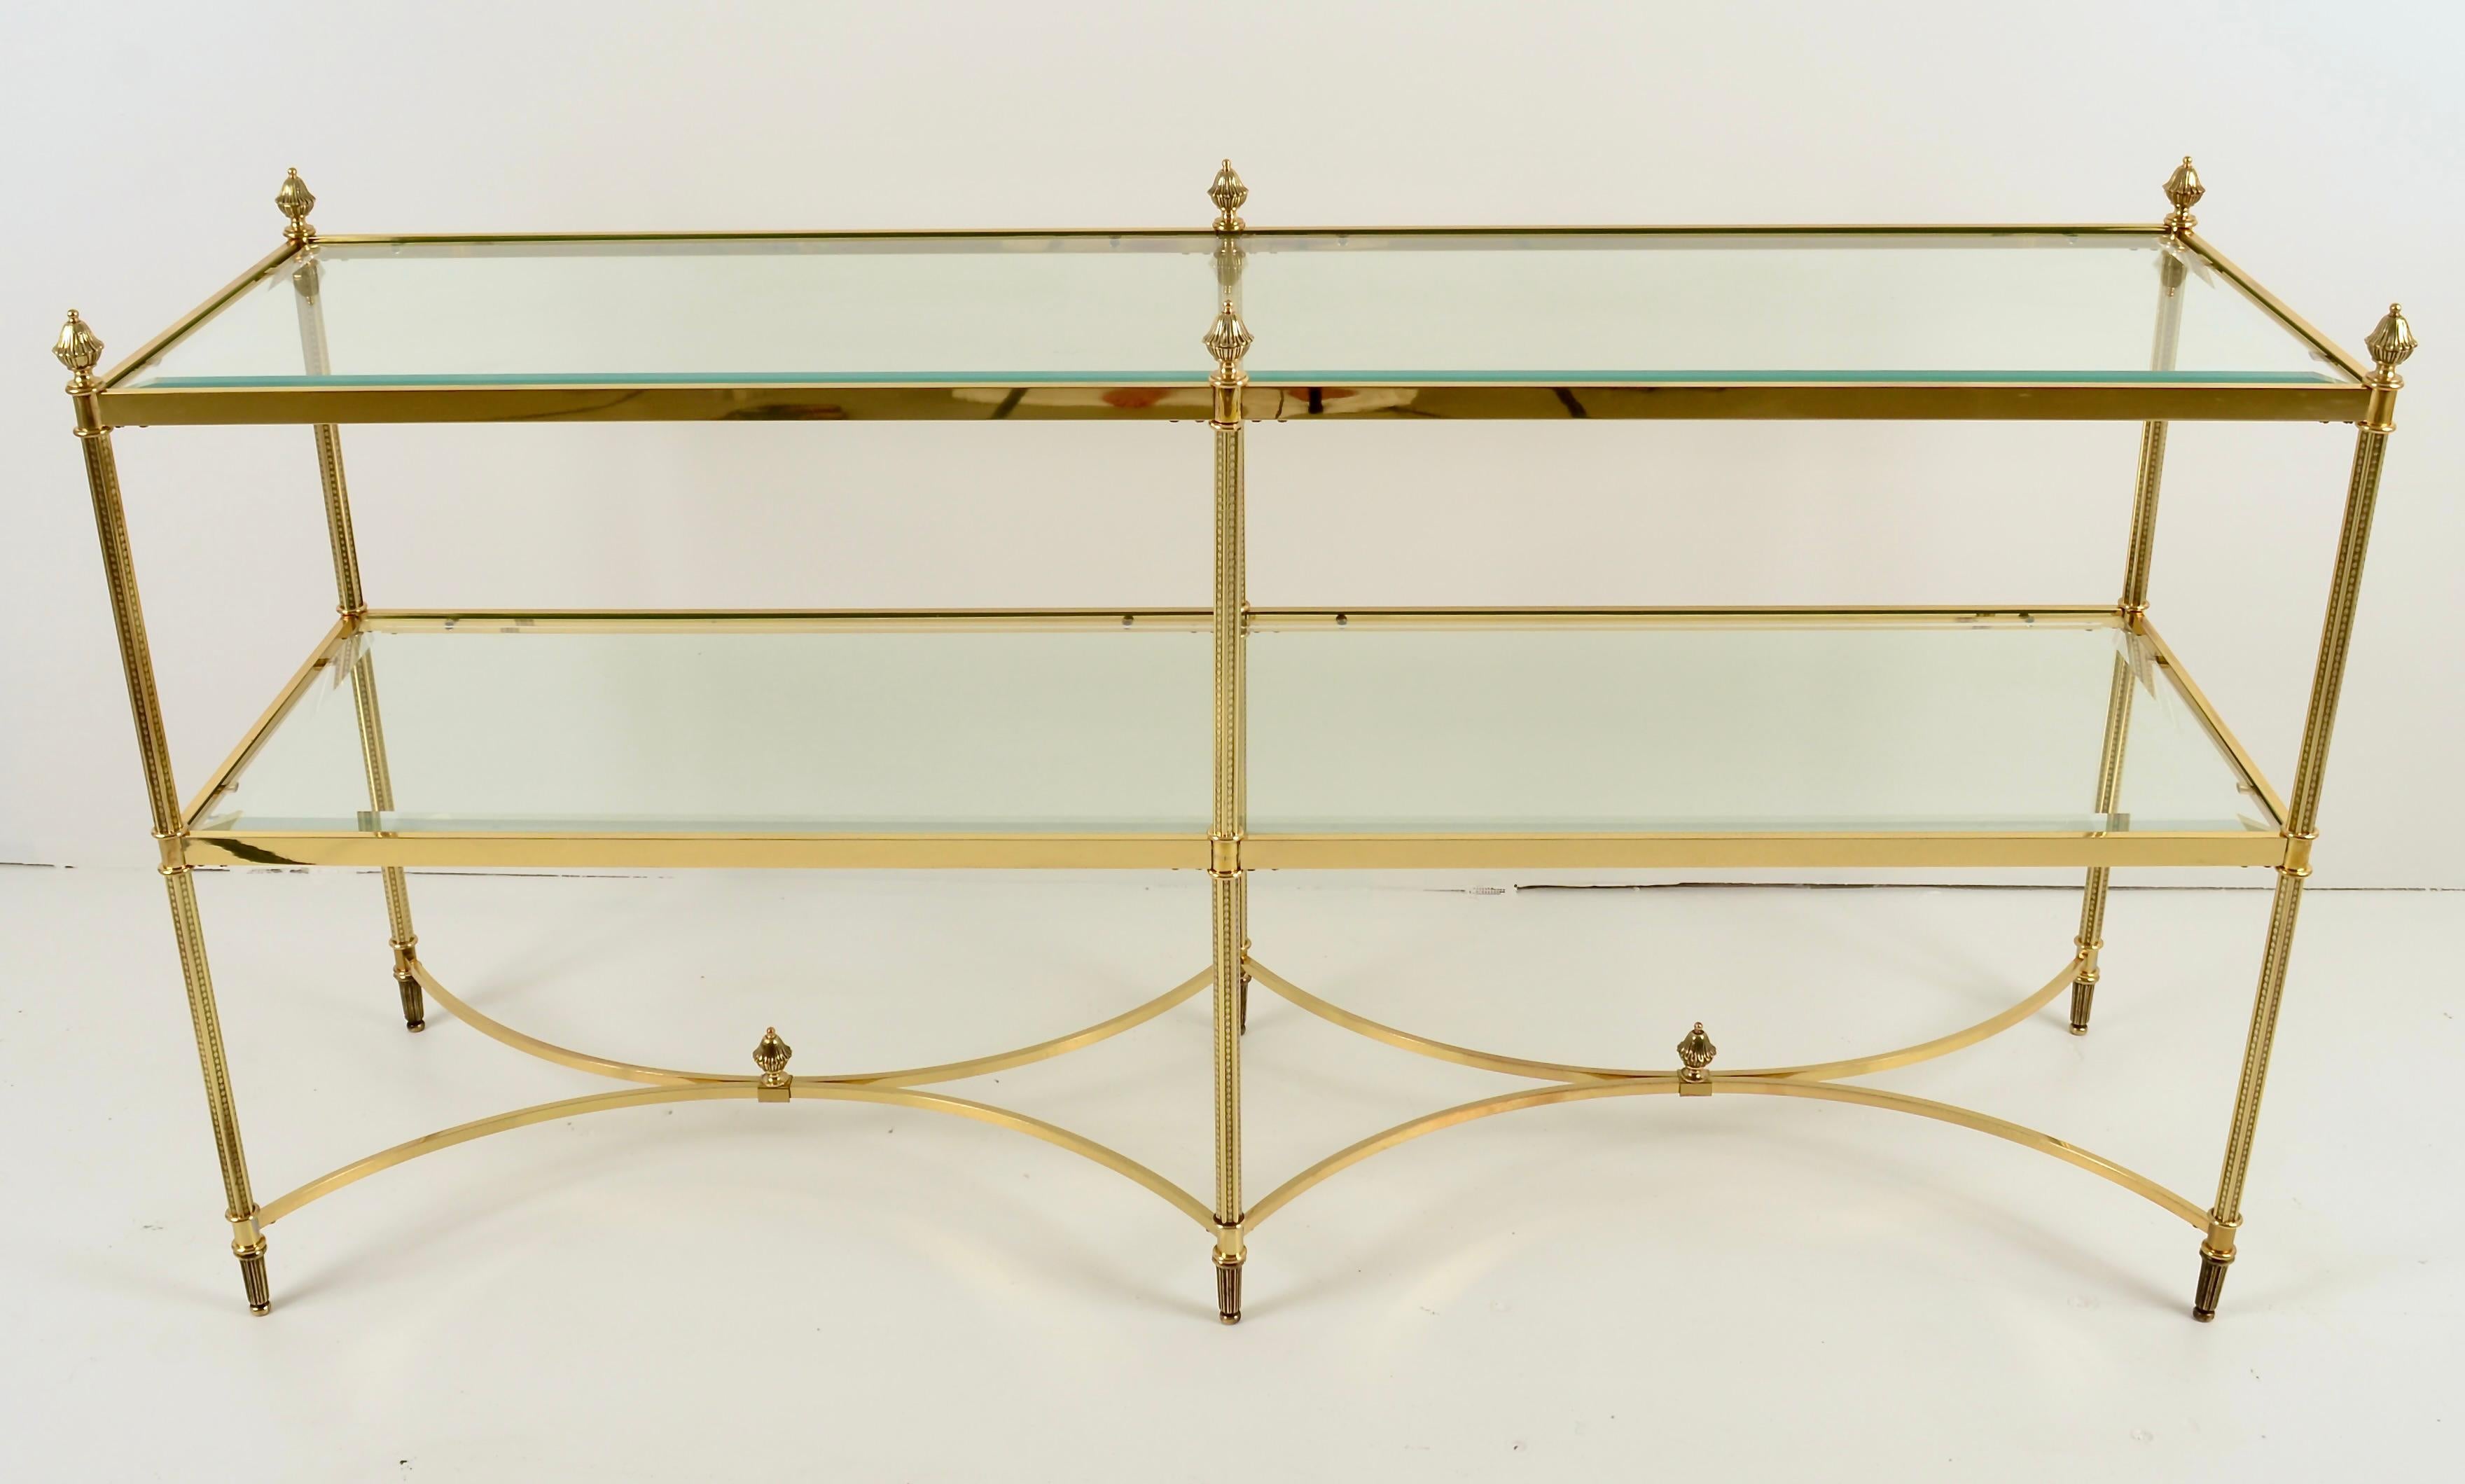 Polished brass sofa or console table with Neo-classical details and substantial, beveled glass shelves. Newly polished and lacquered. Total height is 30 inches to top of finials, table top is 28 inches.
